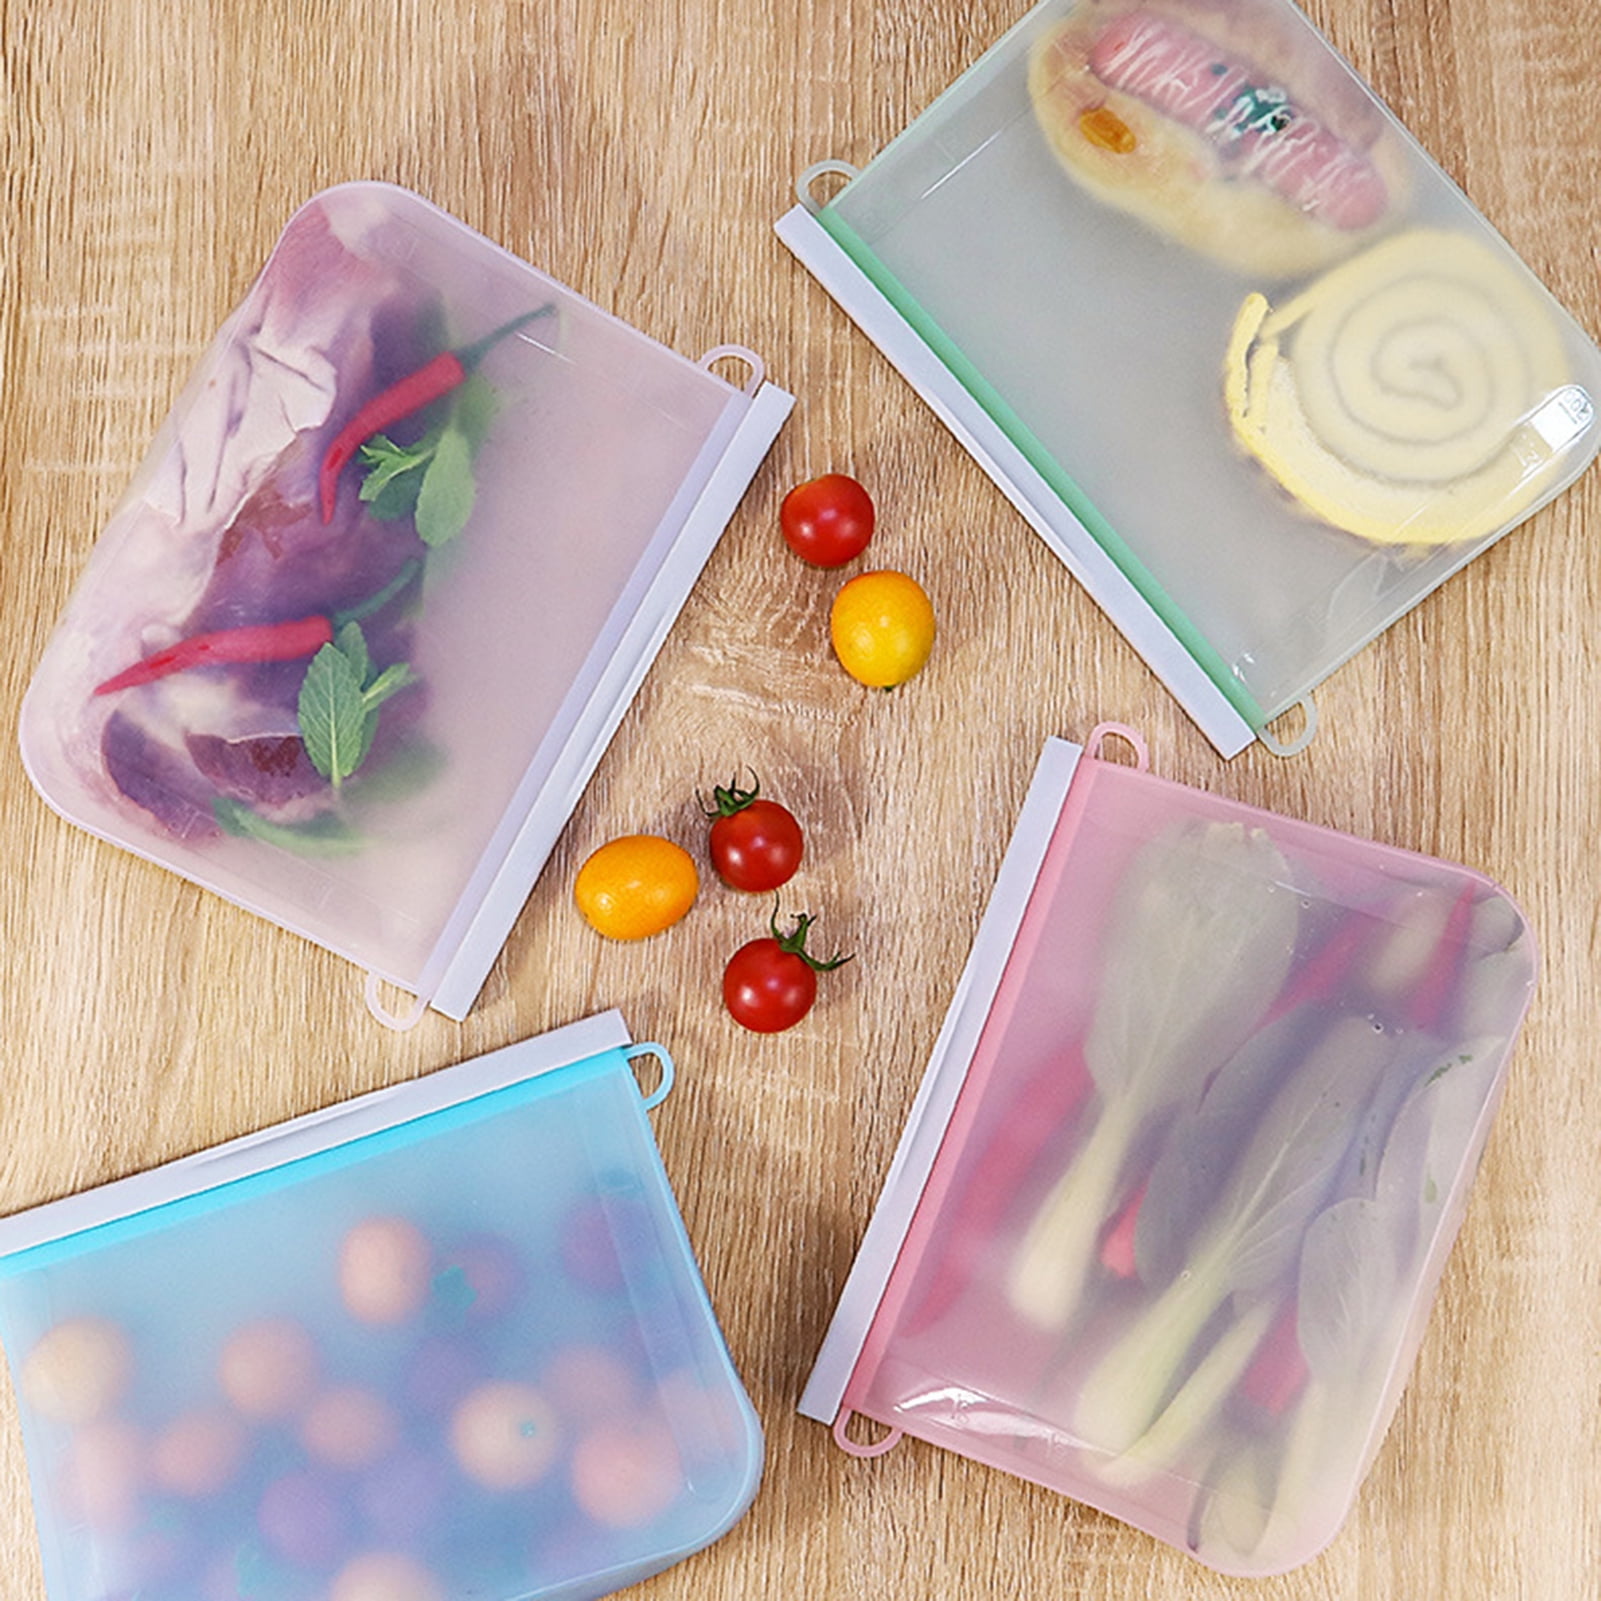 AECHY Food-grade Silicone Food Storage Bag Set with 3 Colors – Aechy